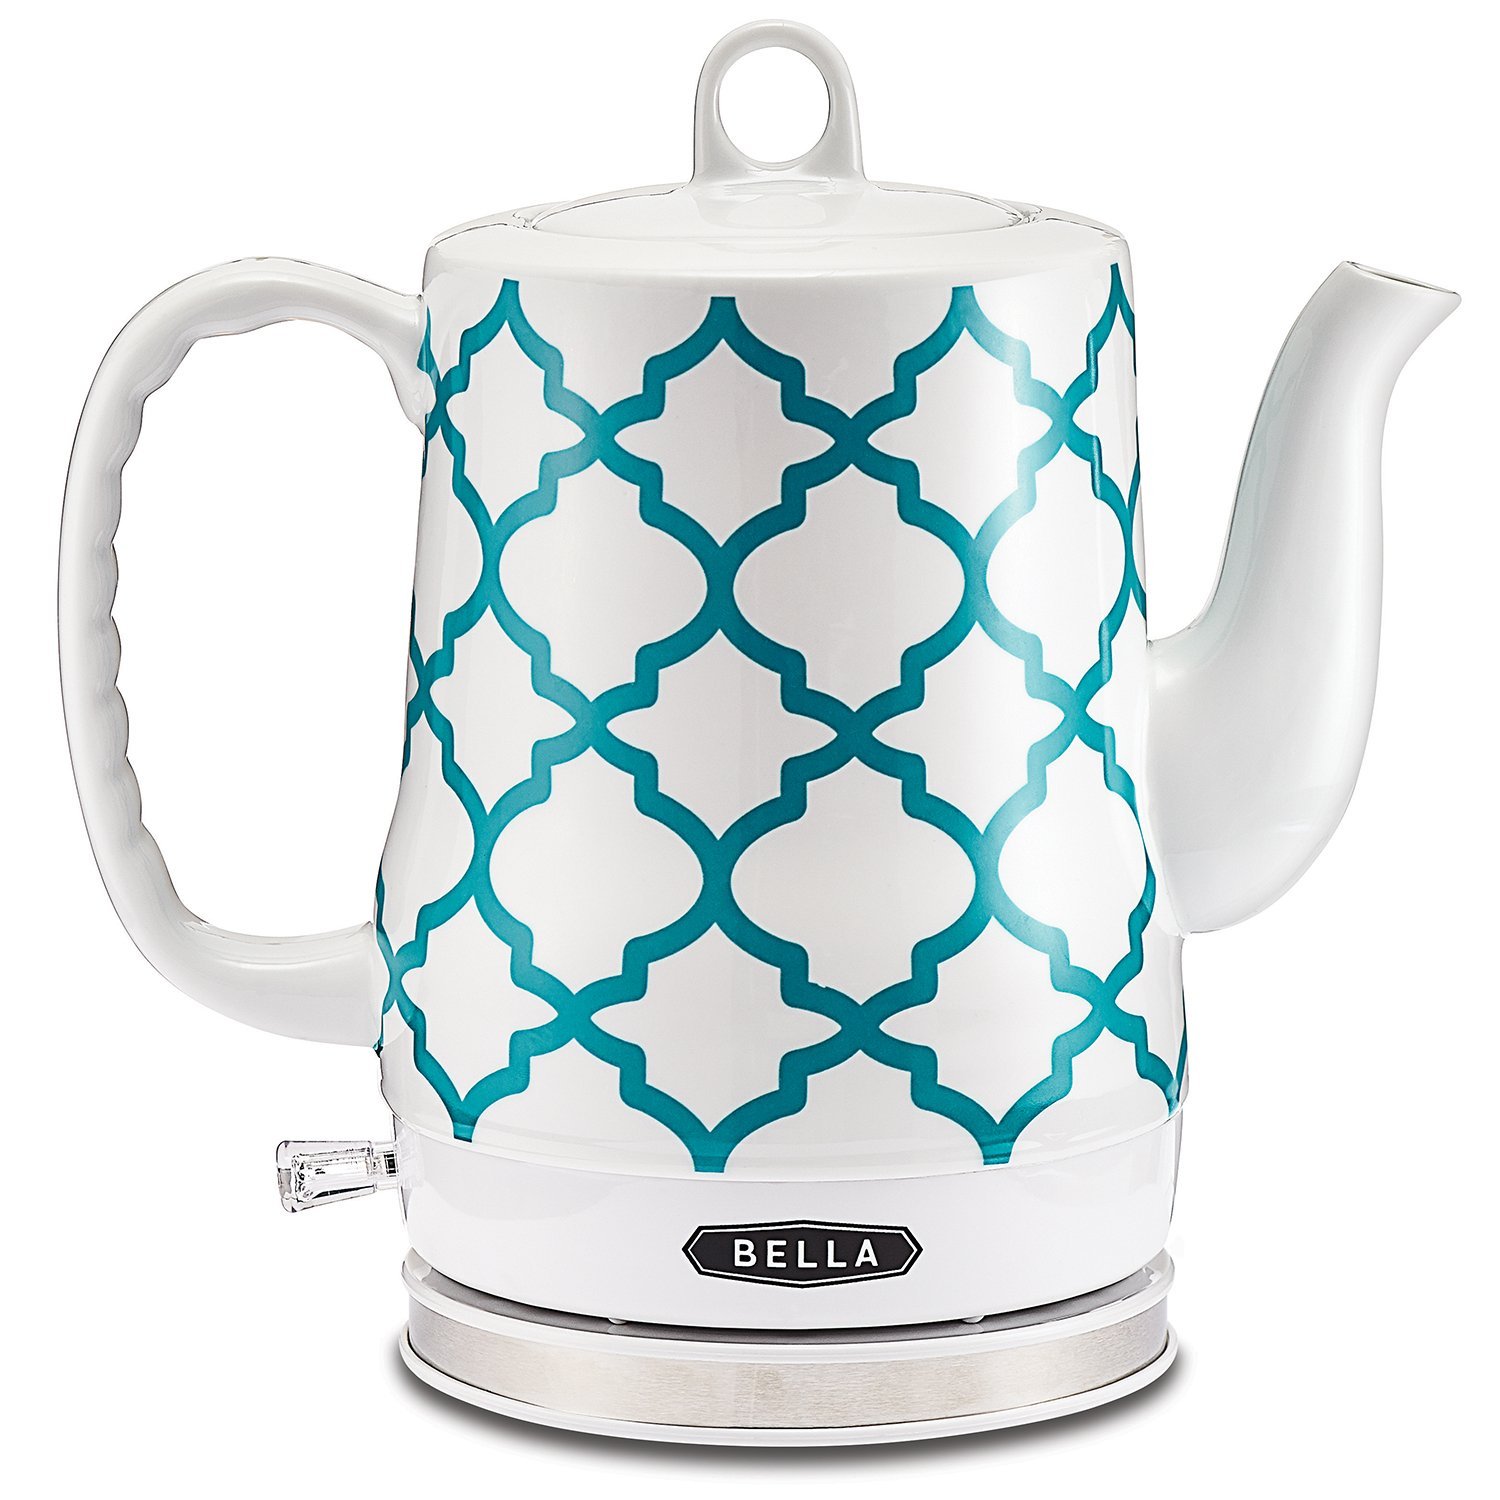 bella-electric-ceramic-kettle-_holiday-gift